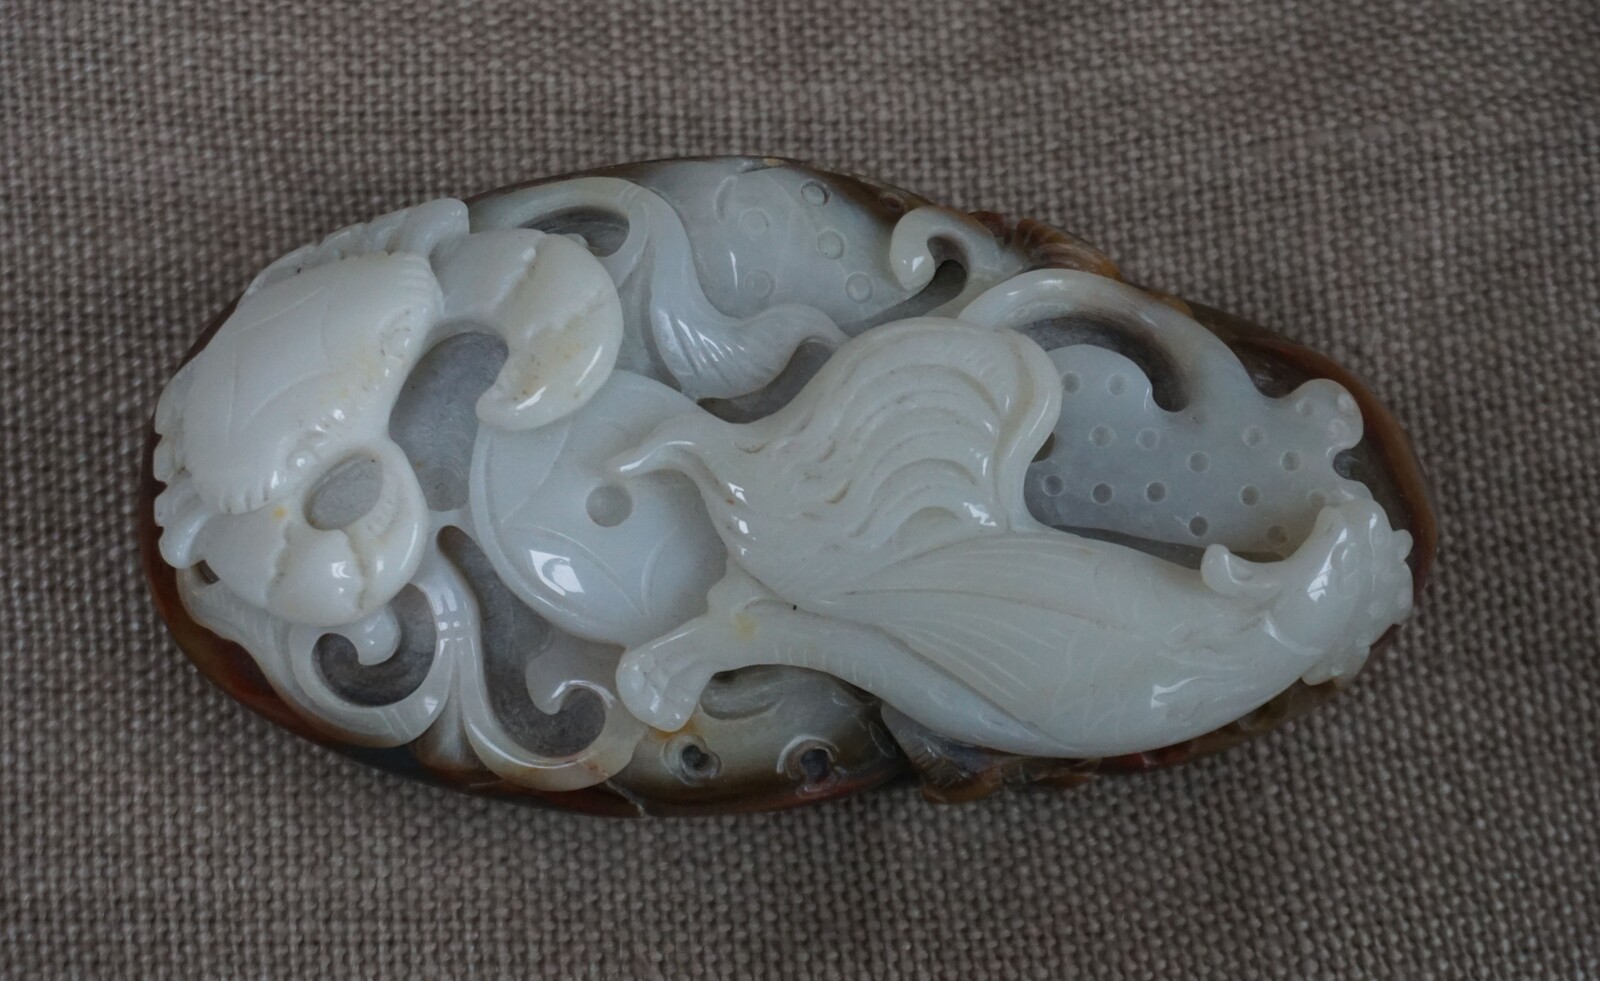 Carved white Jade paperweightSOLD